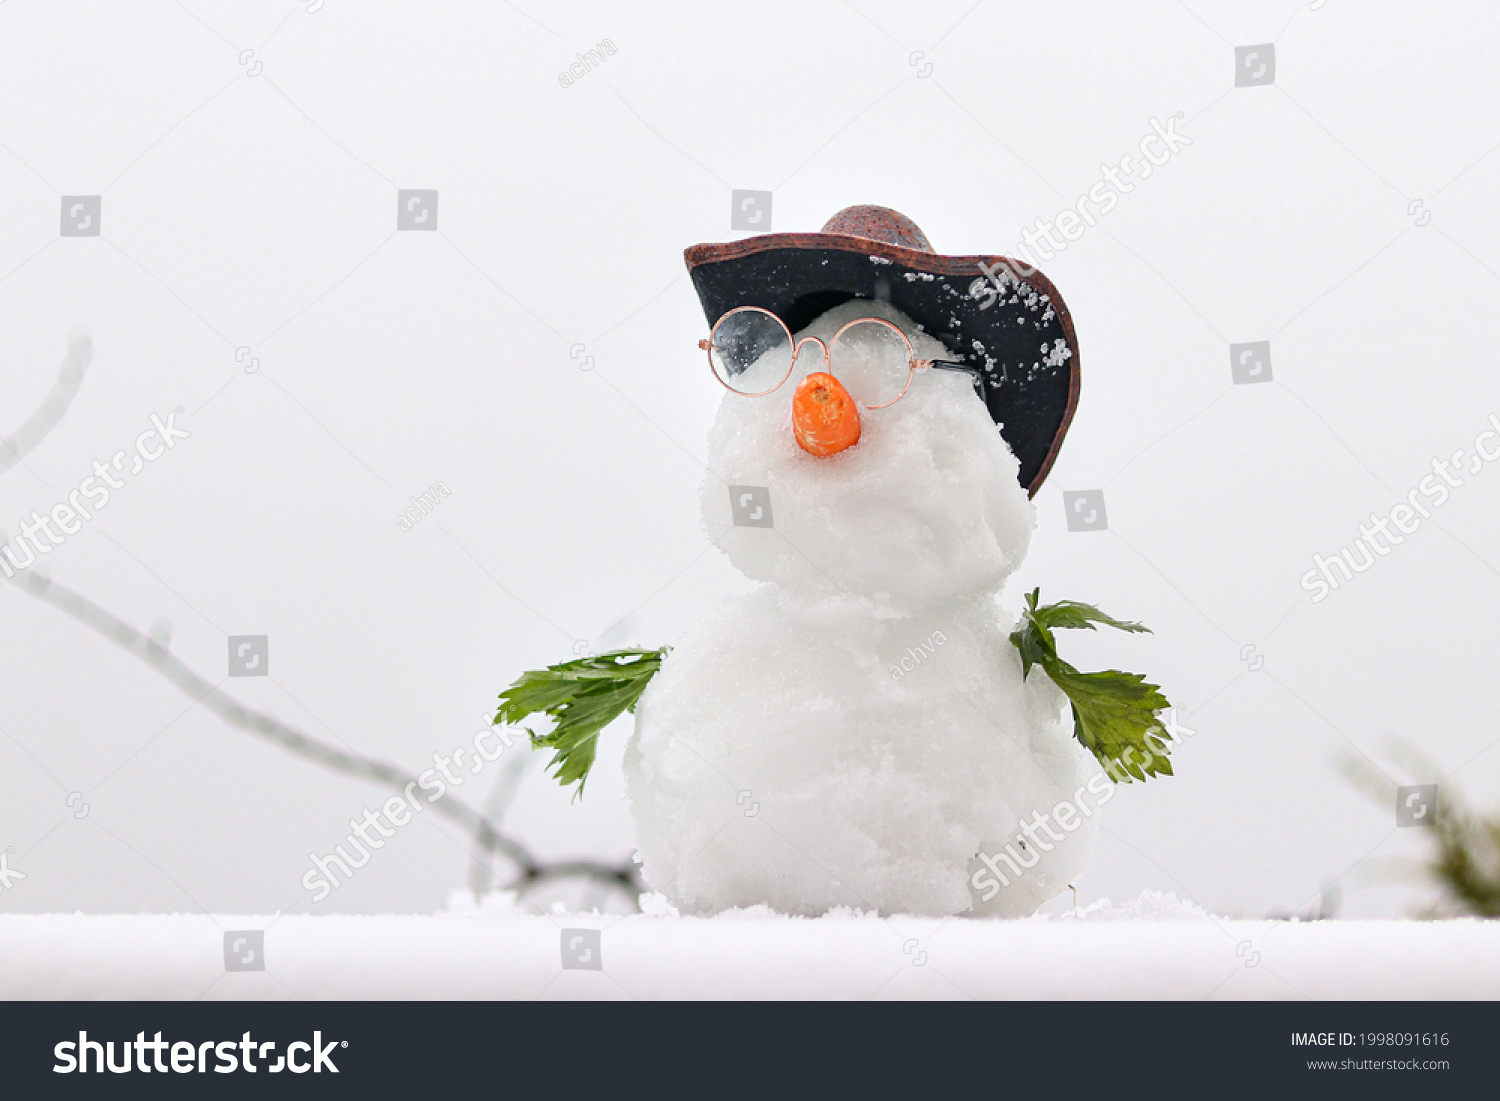 stock-photo-a-snowman-with-a-hat-and-glasses-1998091616.jpg